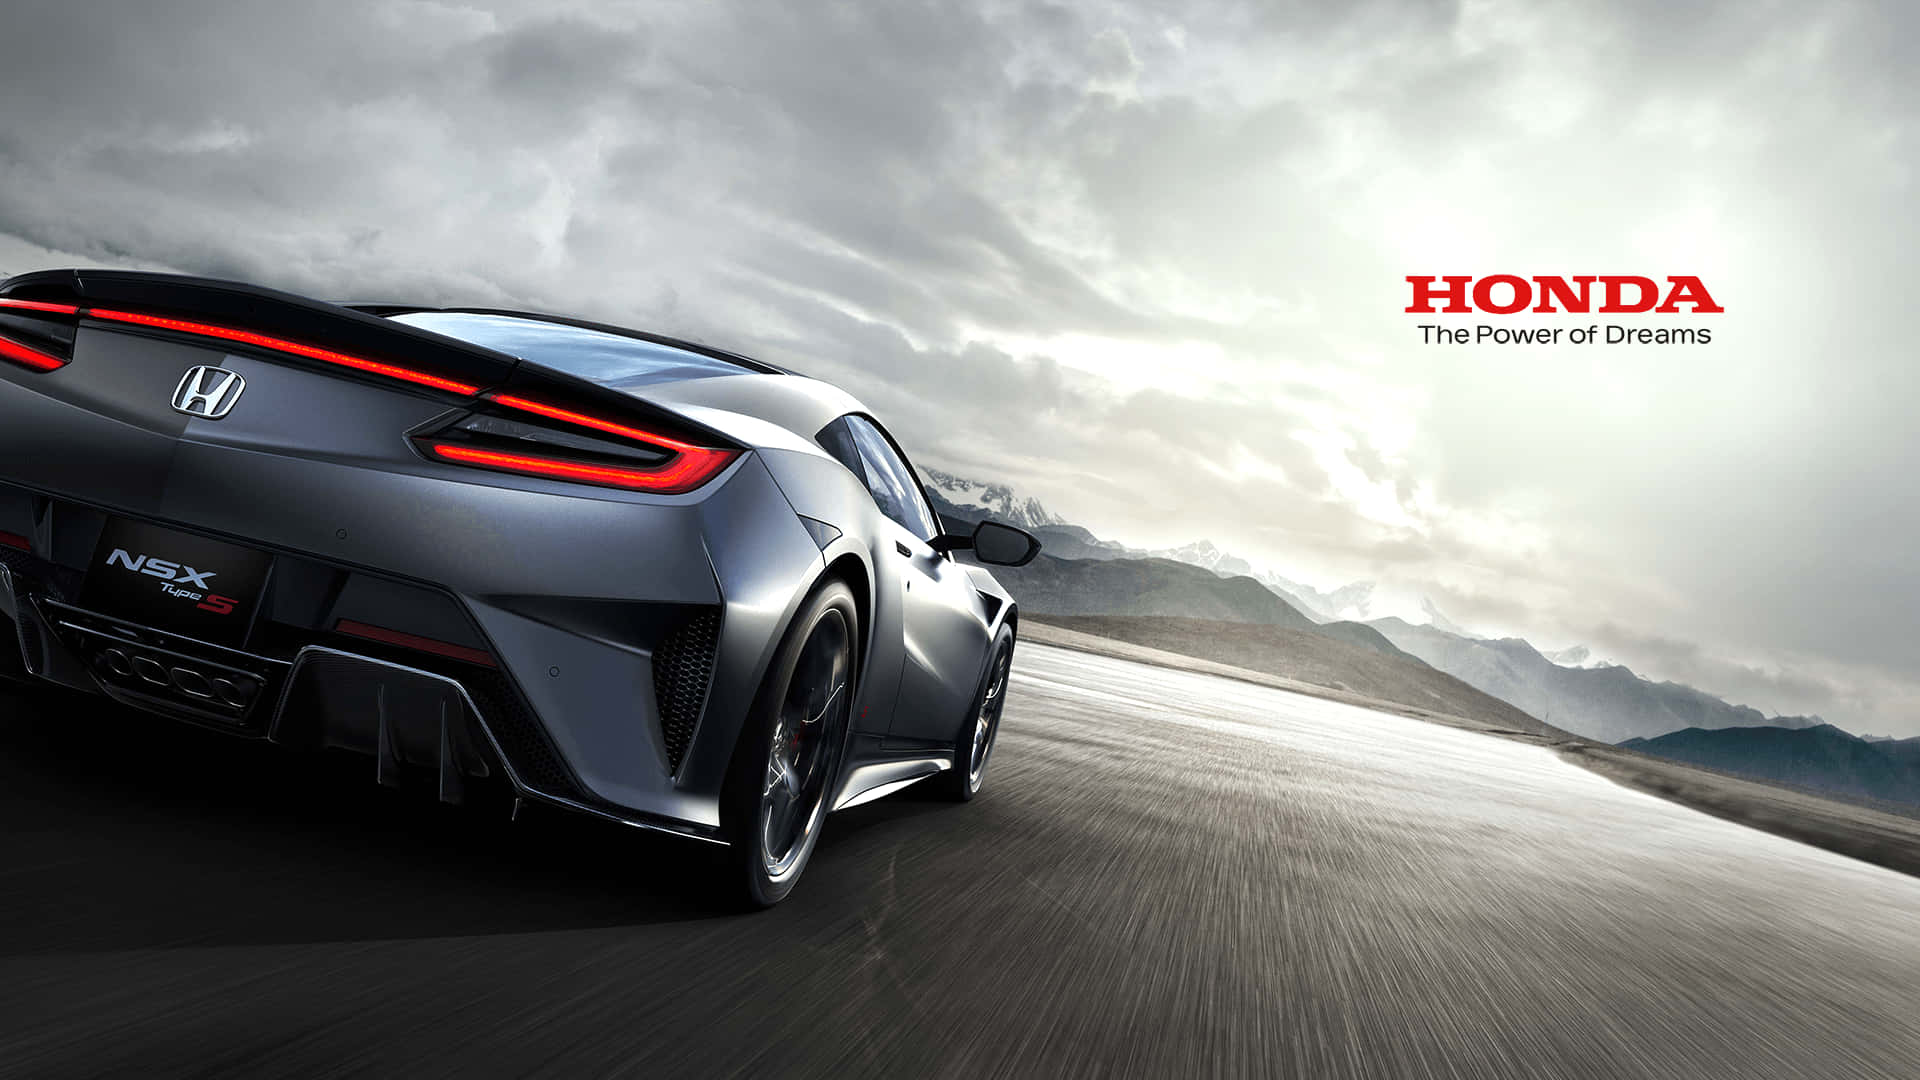 "Experience the power, design, and luxury of the Honda Luxury Line"